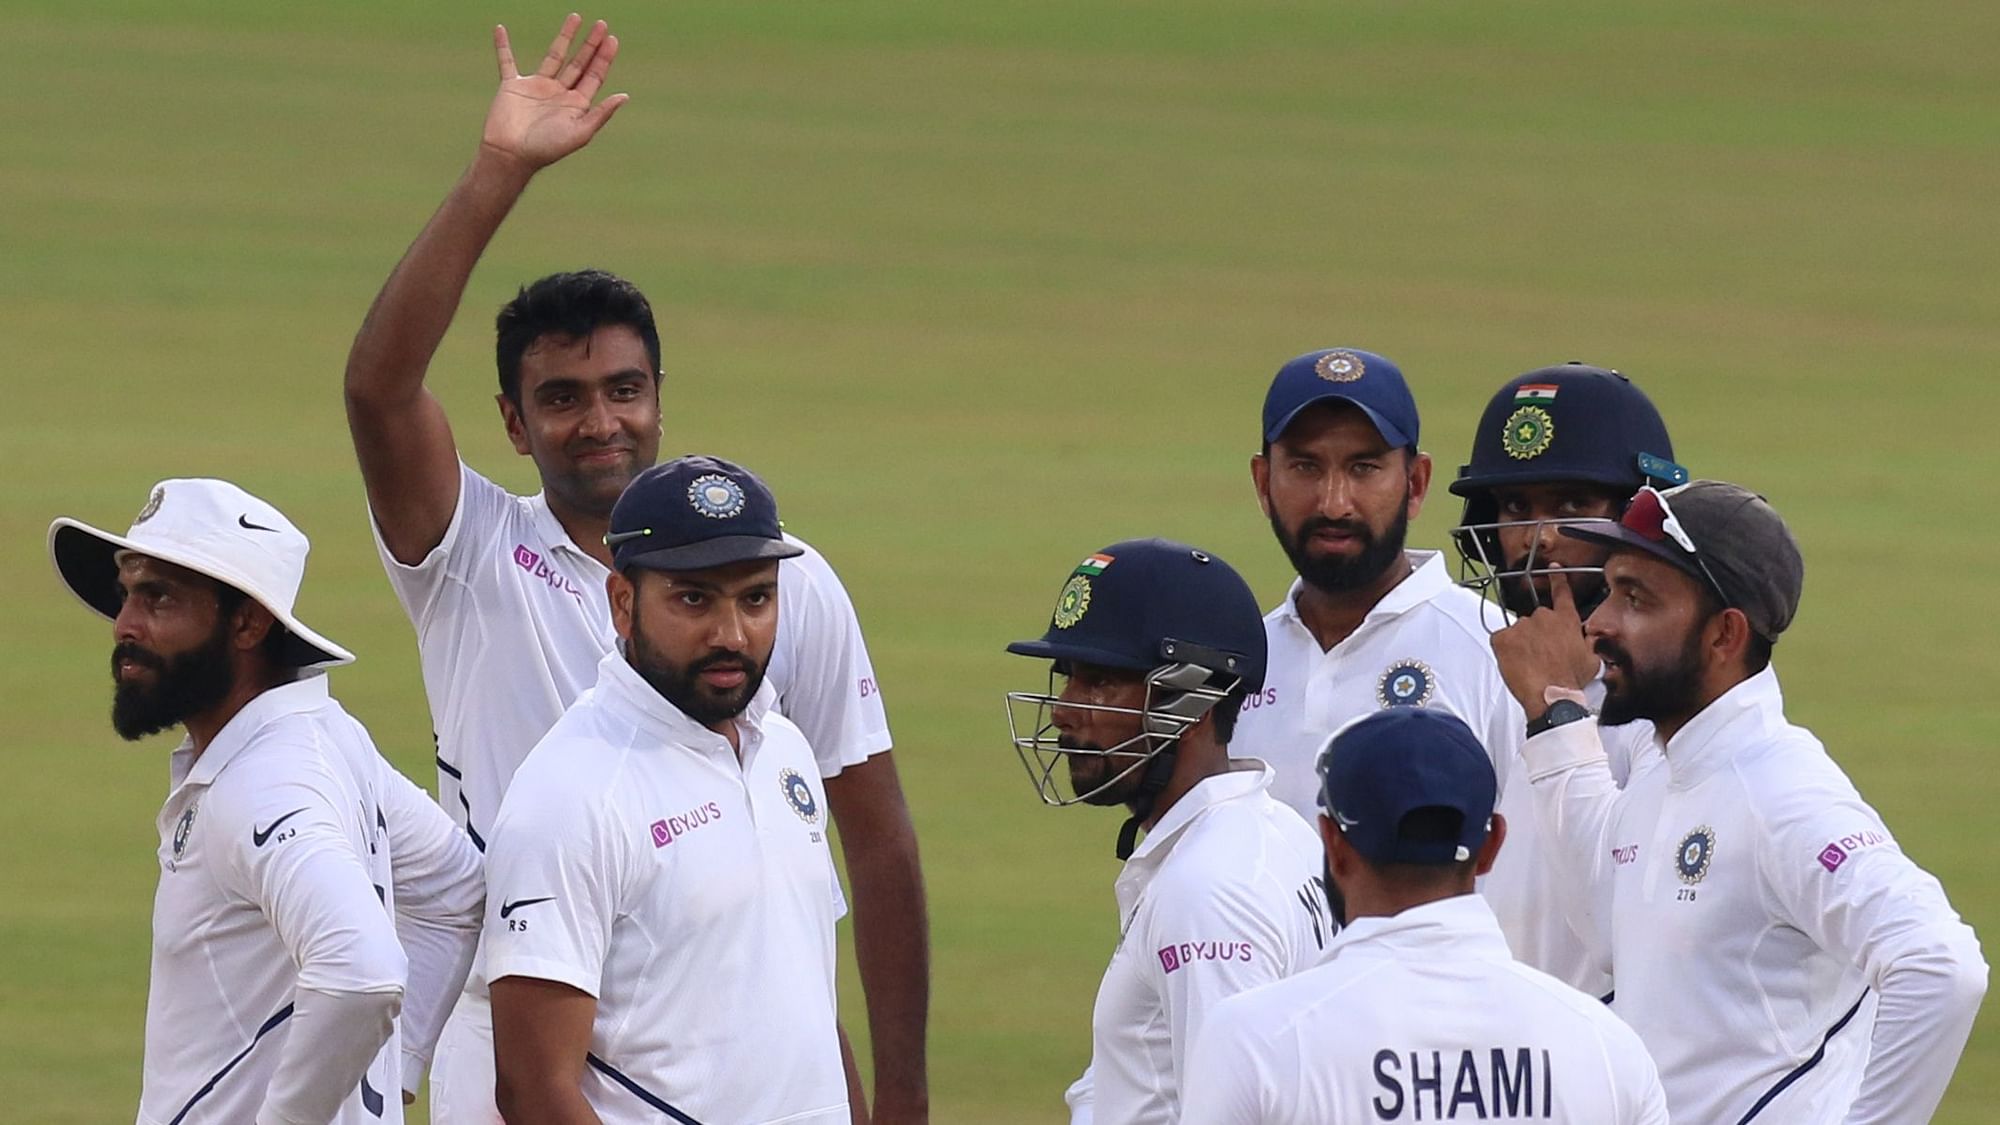 Ashwin has recorded his 27th instance of five wickets or more in an innings in 66 Tests.